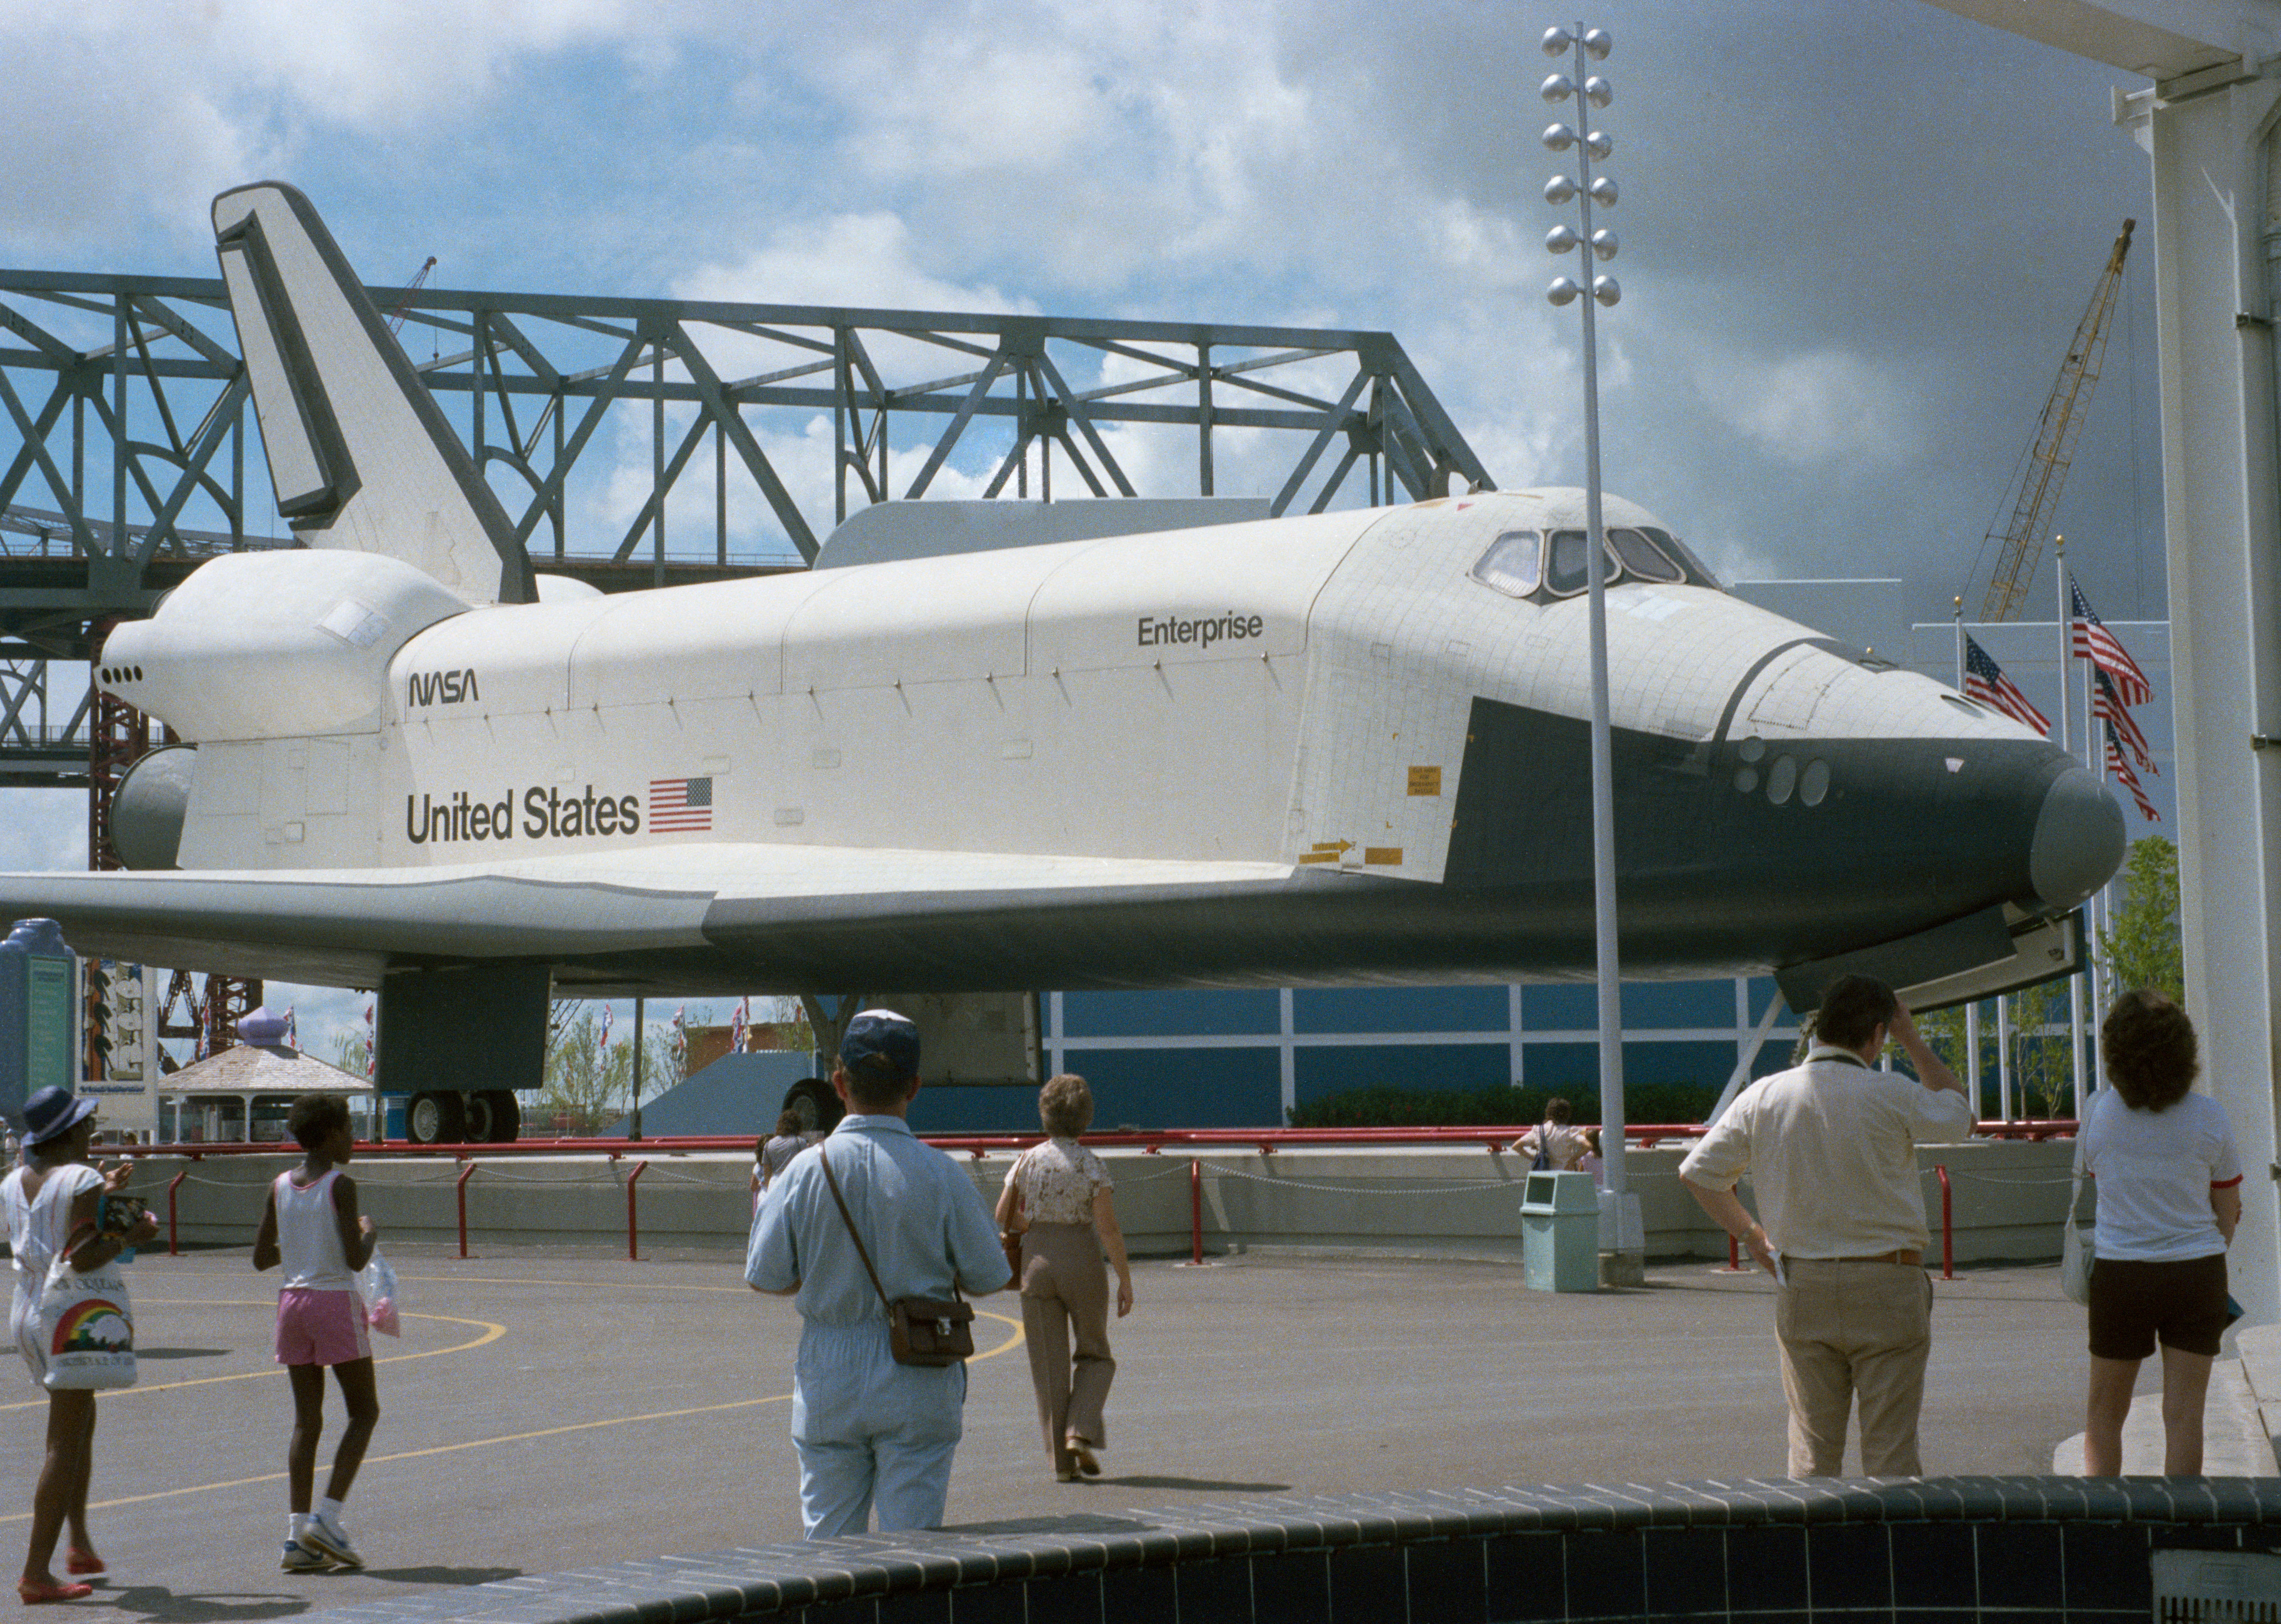 Enterprise on display at the World's Fair in New Orleans in 1984